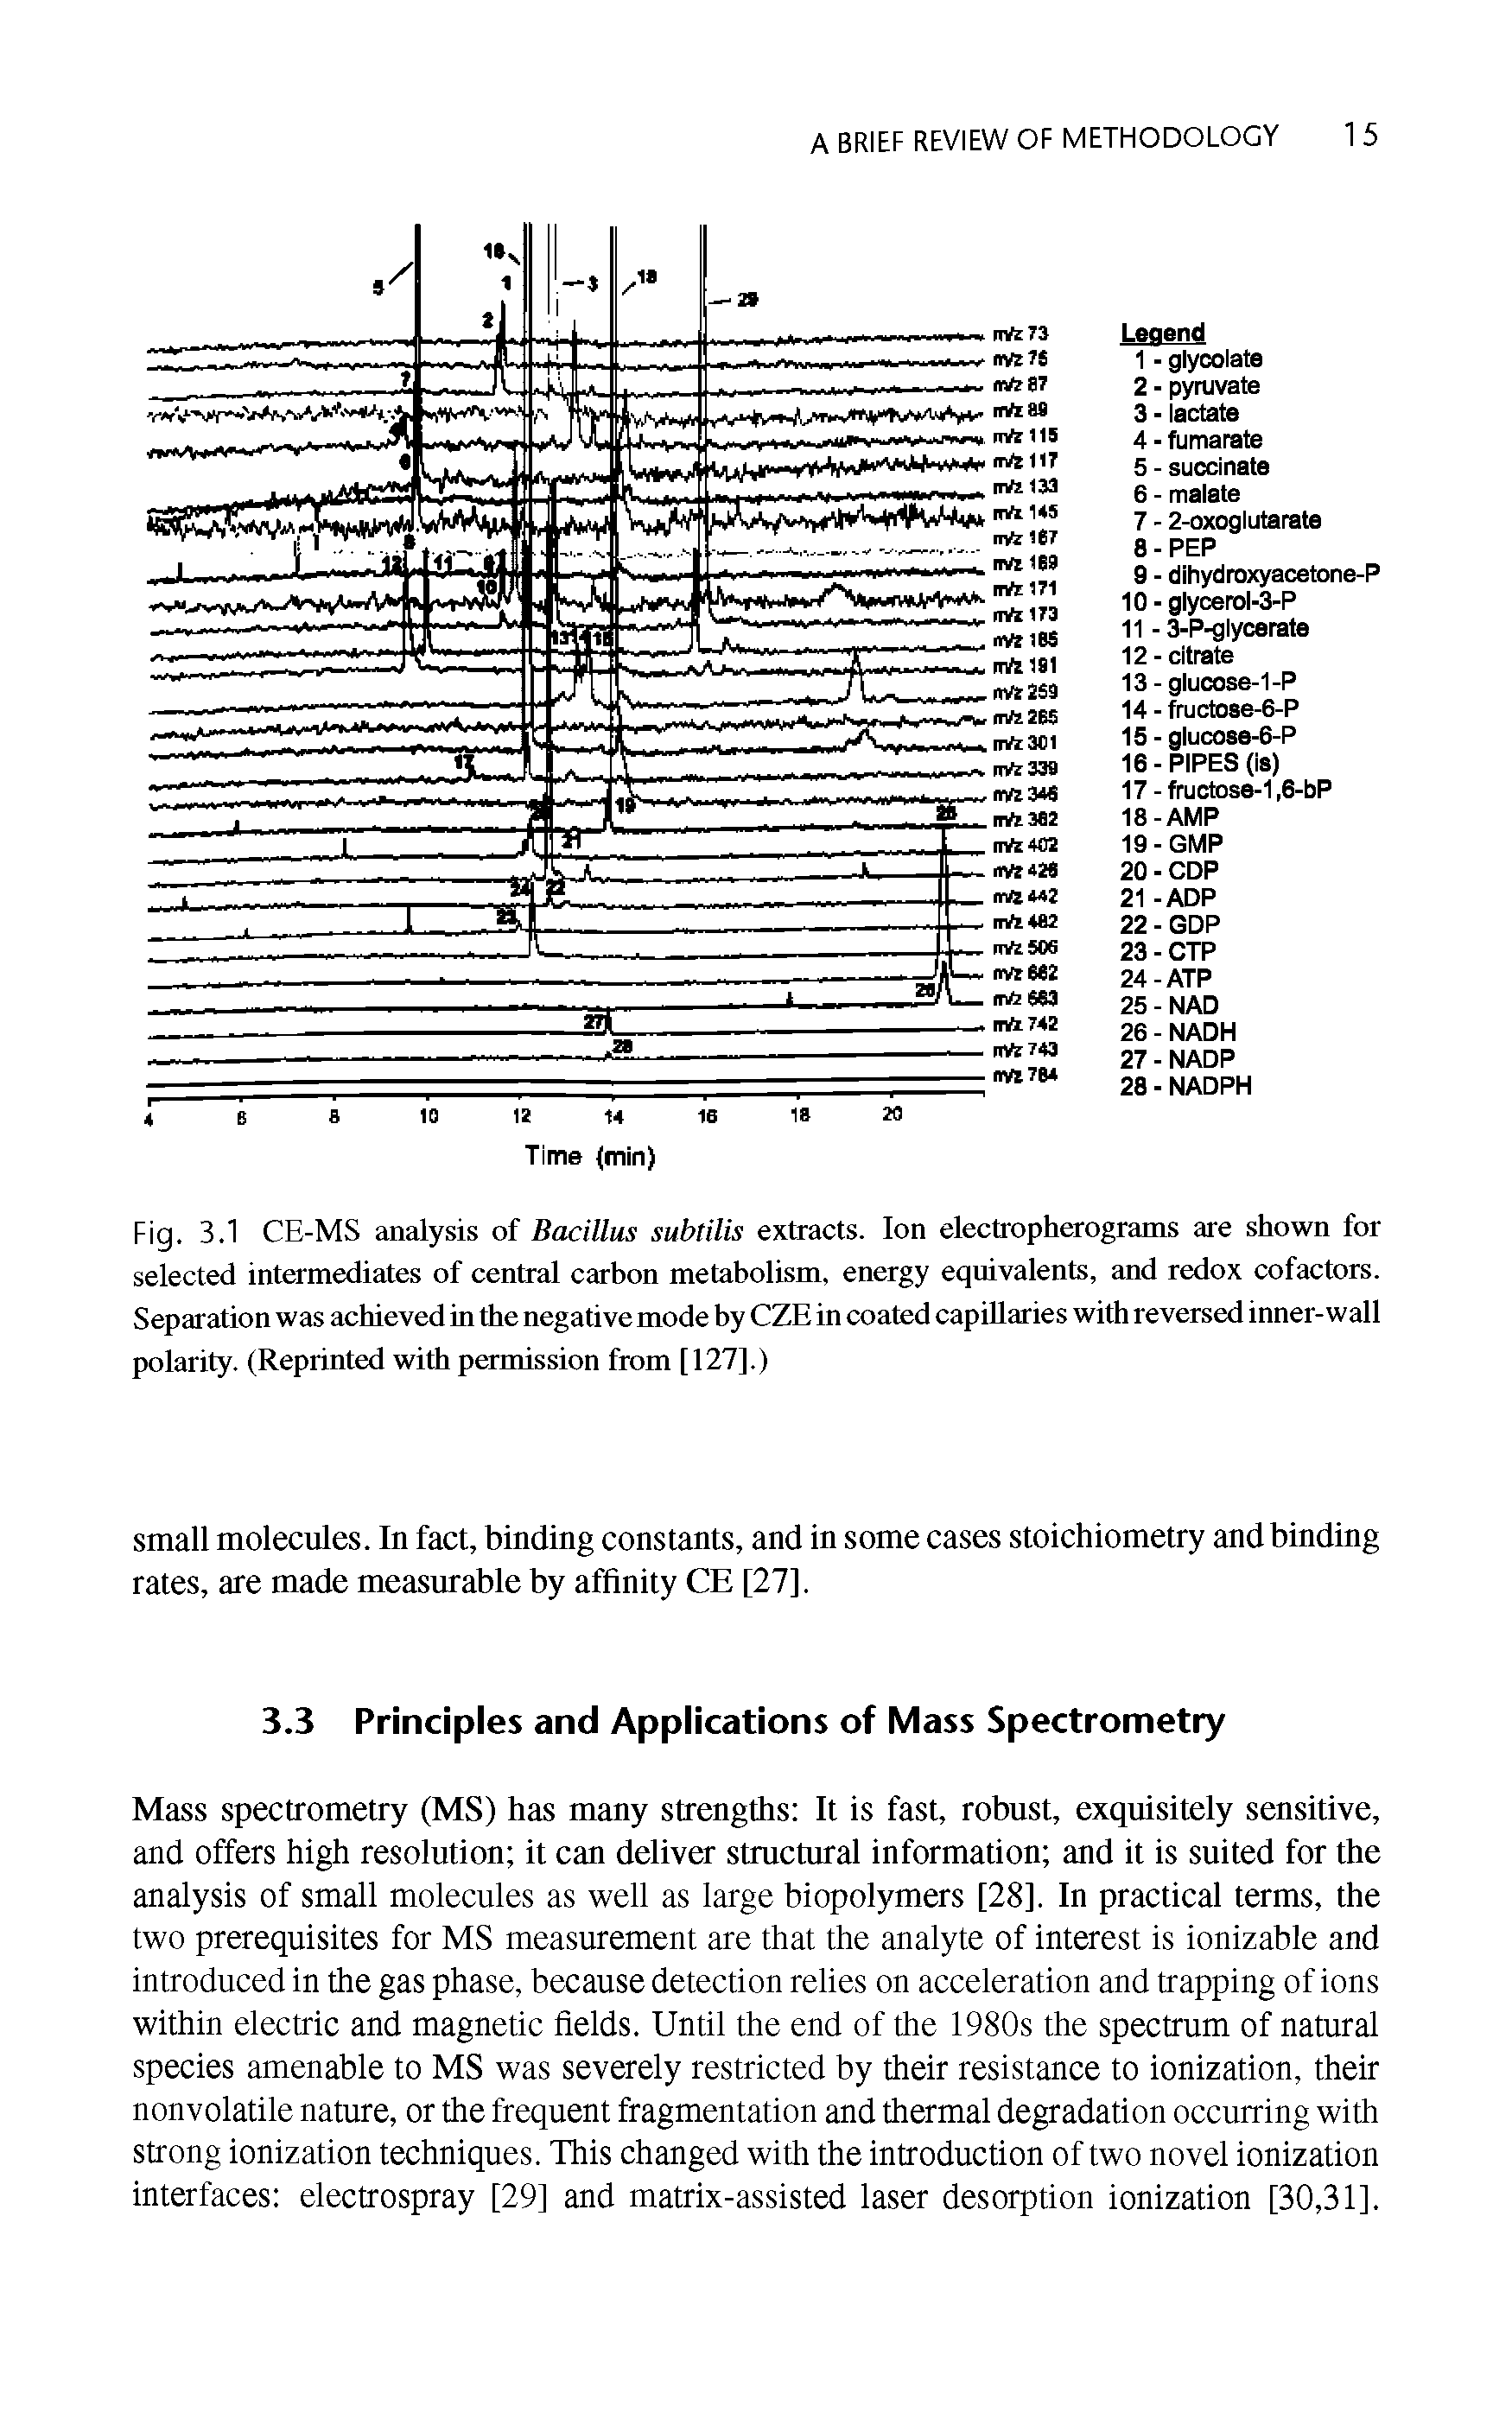 Fig. 3.1 CE-MS analysis of Bacillus subtilis extracts. Ion electropherograms are shown for selected intermediates of central carbon metabolism, energy eqnivalents, and redox cofactors. Separation was achieved in the negative mode by CZE in coated capillaries with reversed inner-wall polarity. (Reprinted with permission from [127].)...